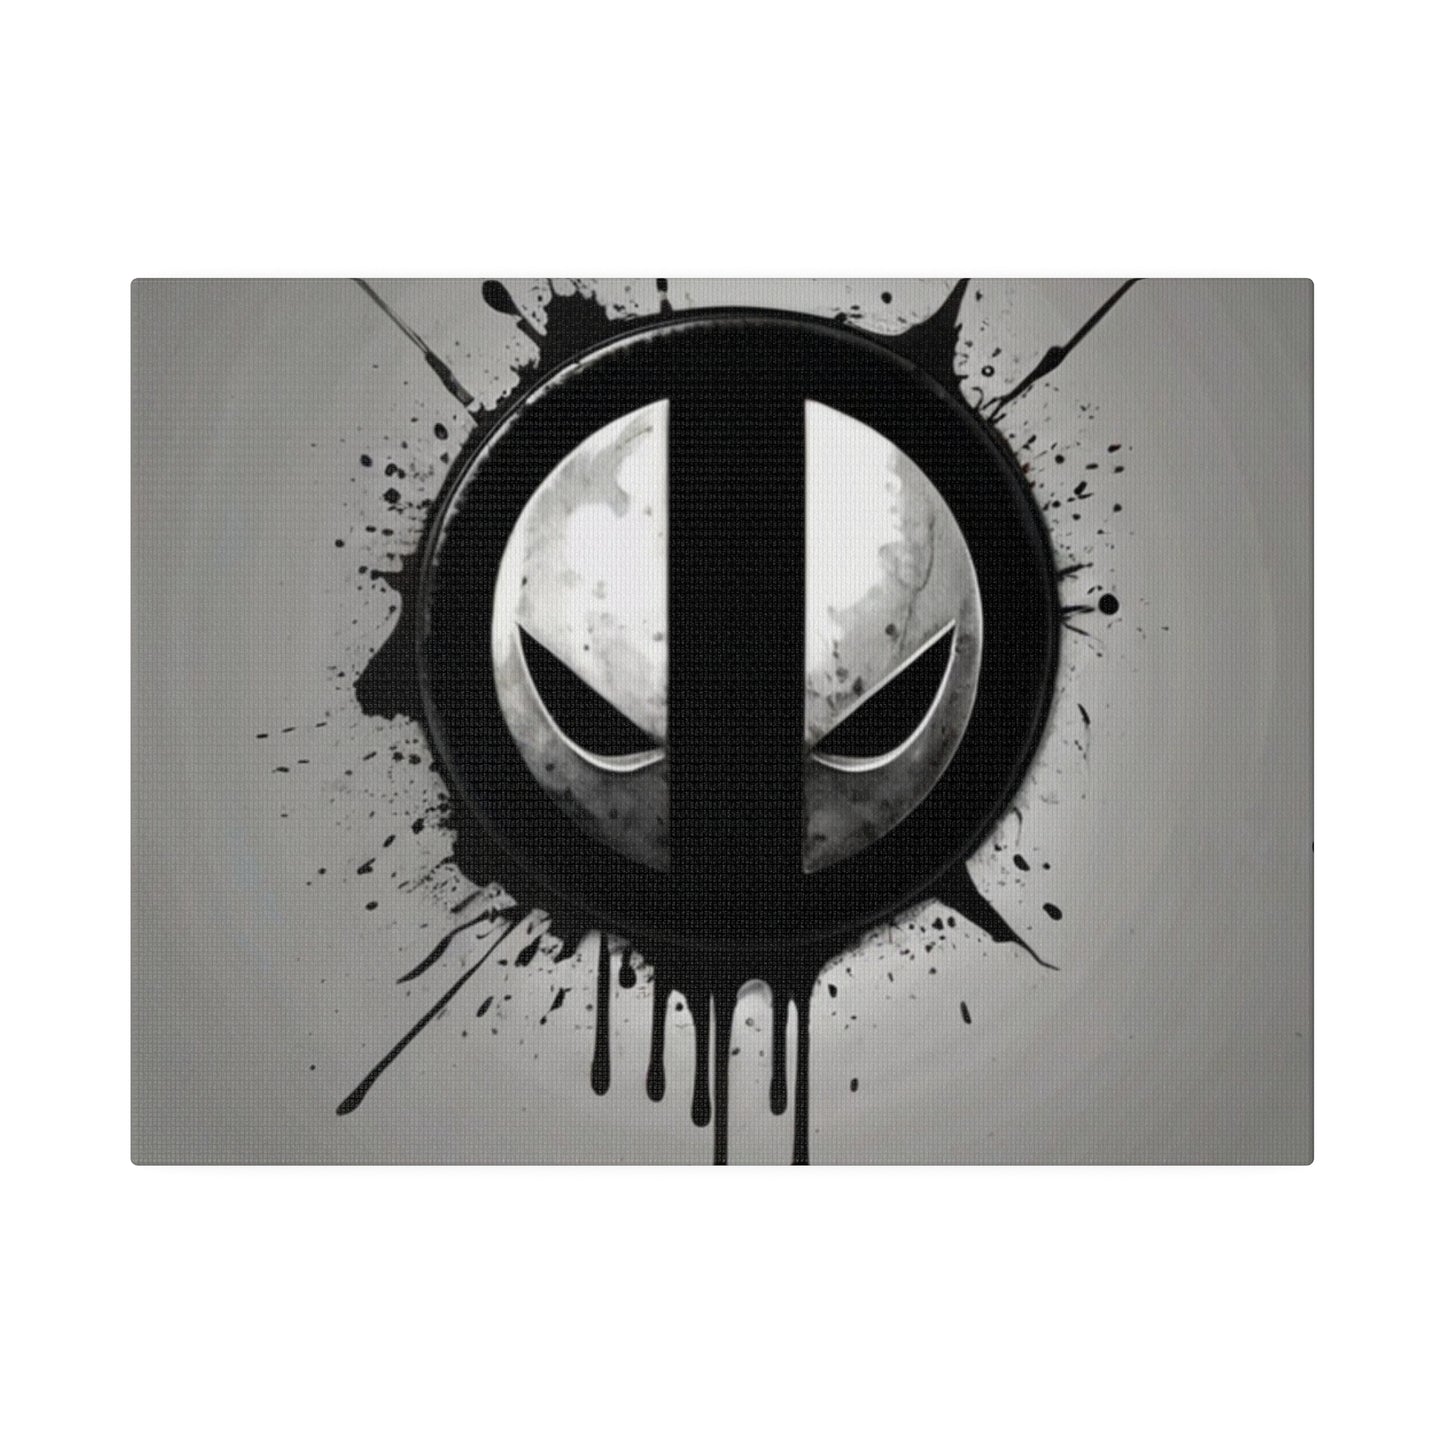 Deadpool Logo, Messy Artwork, Black and Silver - Matte Canvas, Stretched, 0.75"